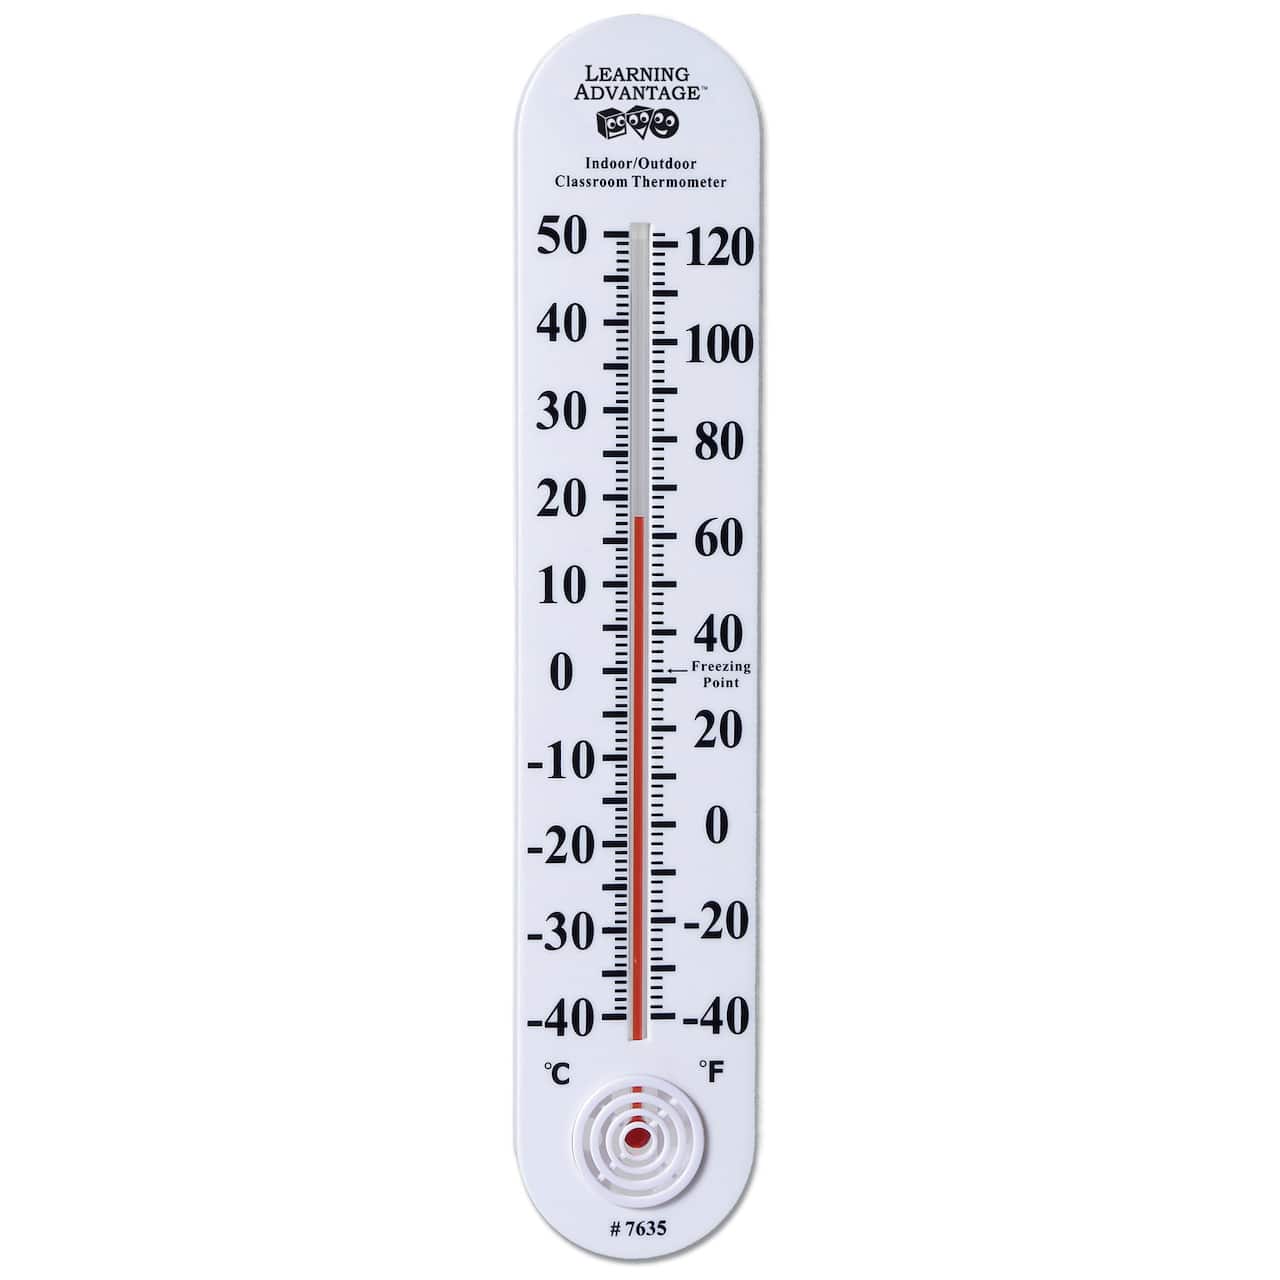 Learning Advantage™ Indoor / Outdoor Classroom Thermometer